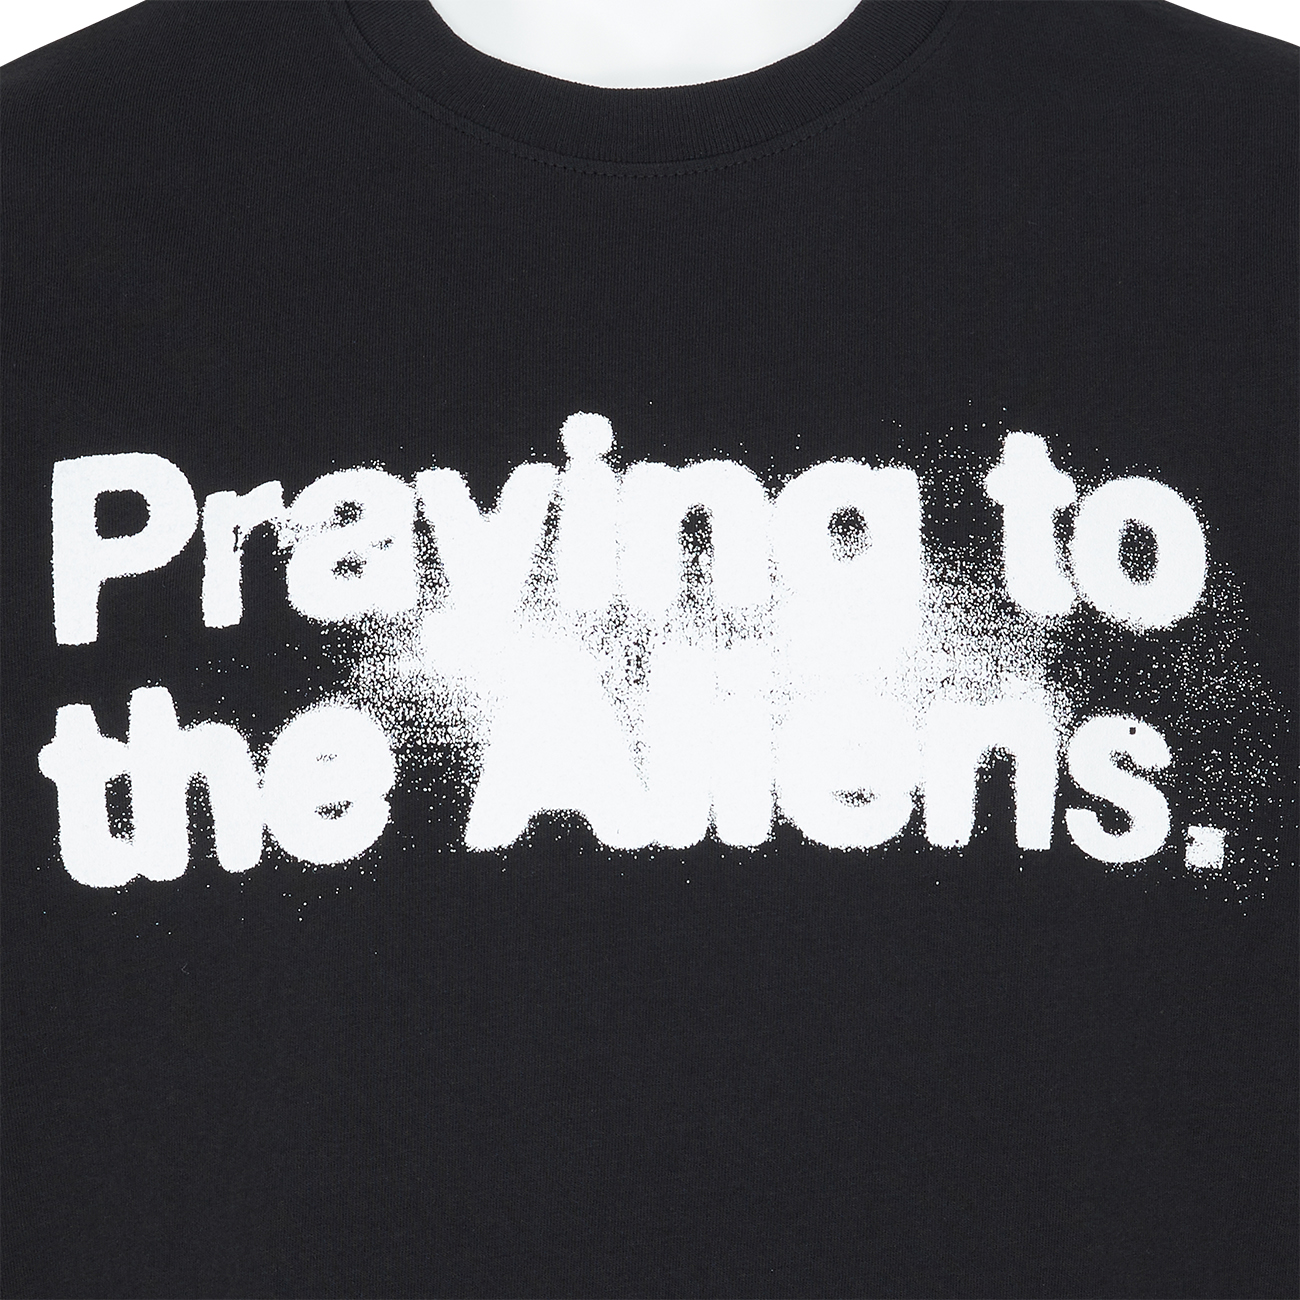 MARVIN (マーヴィン) - PRAYING TO THE ALIENS T-SHIRT BLACKの詳細画像3